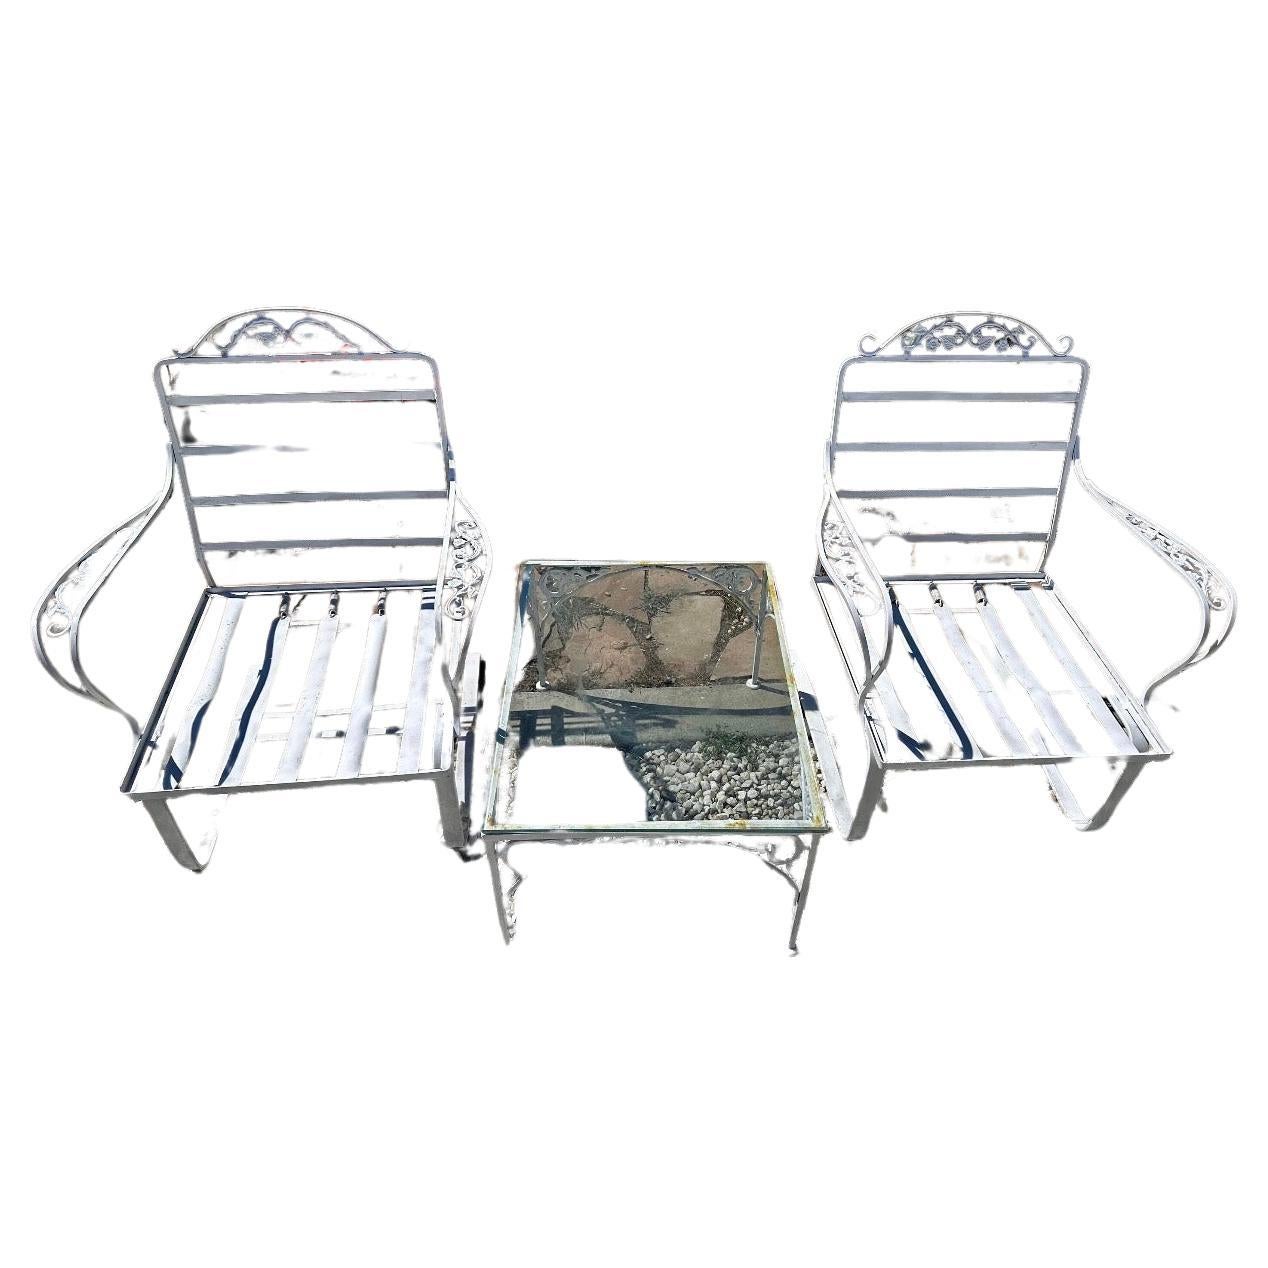 A beautiful set of rocking chairs plus matching coffee table with floral pattern